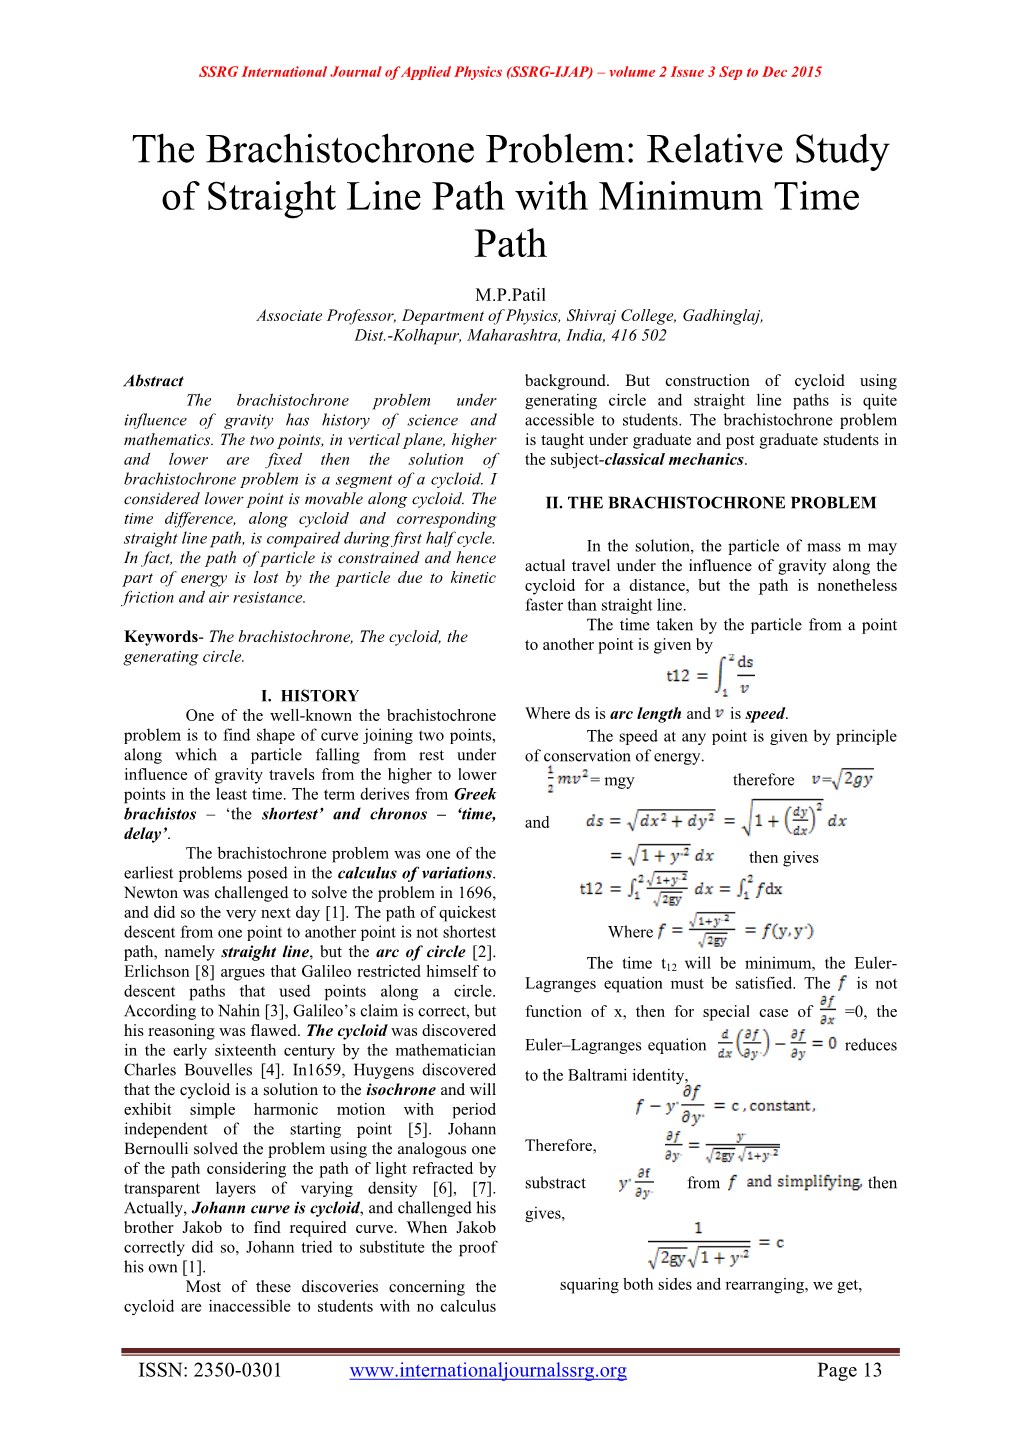 The Brachistochrone Problem: Relative Study of Straight Line Path with Minimum Time Path